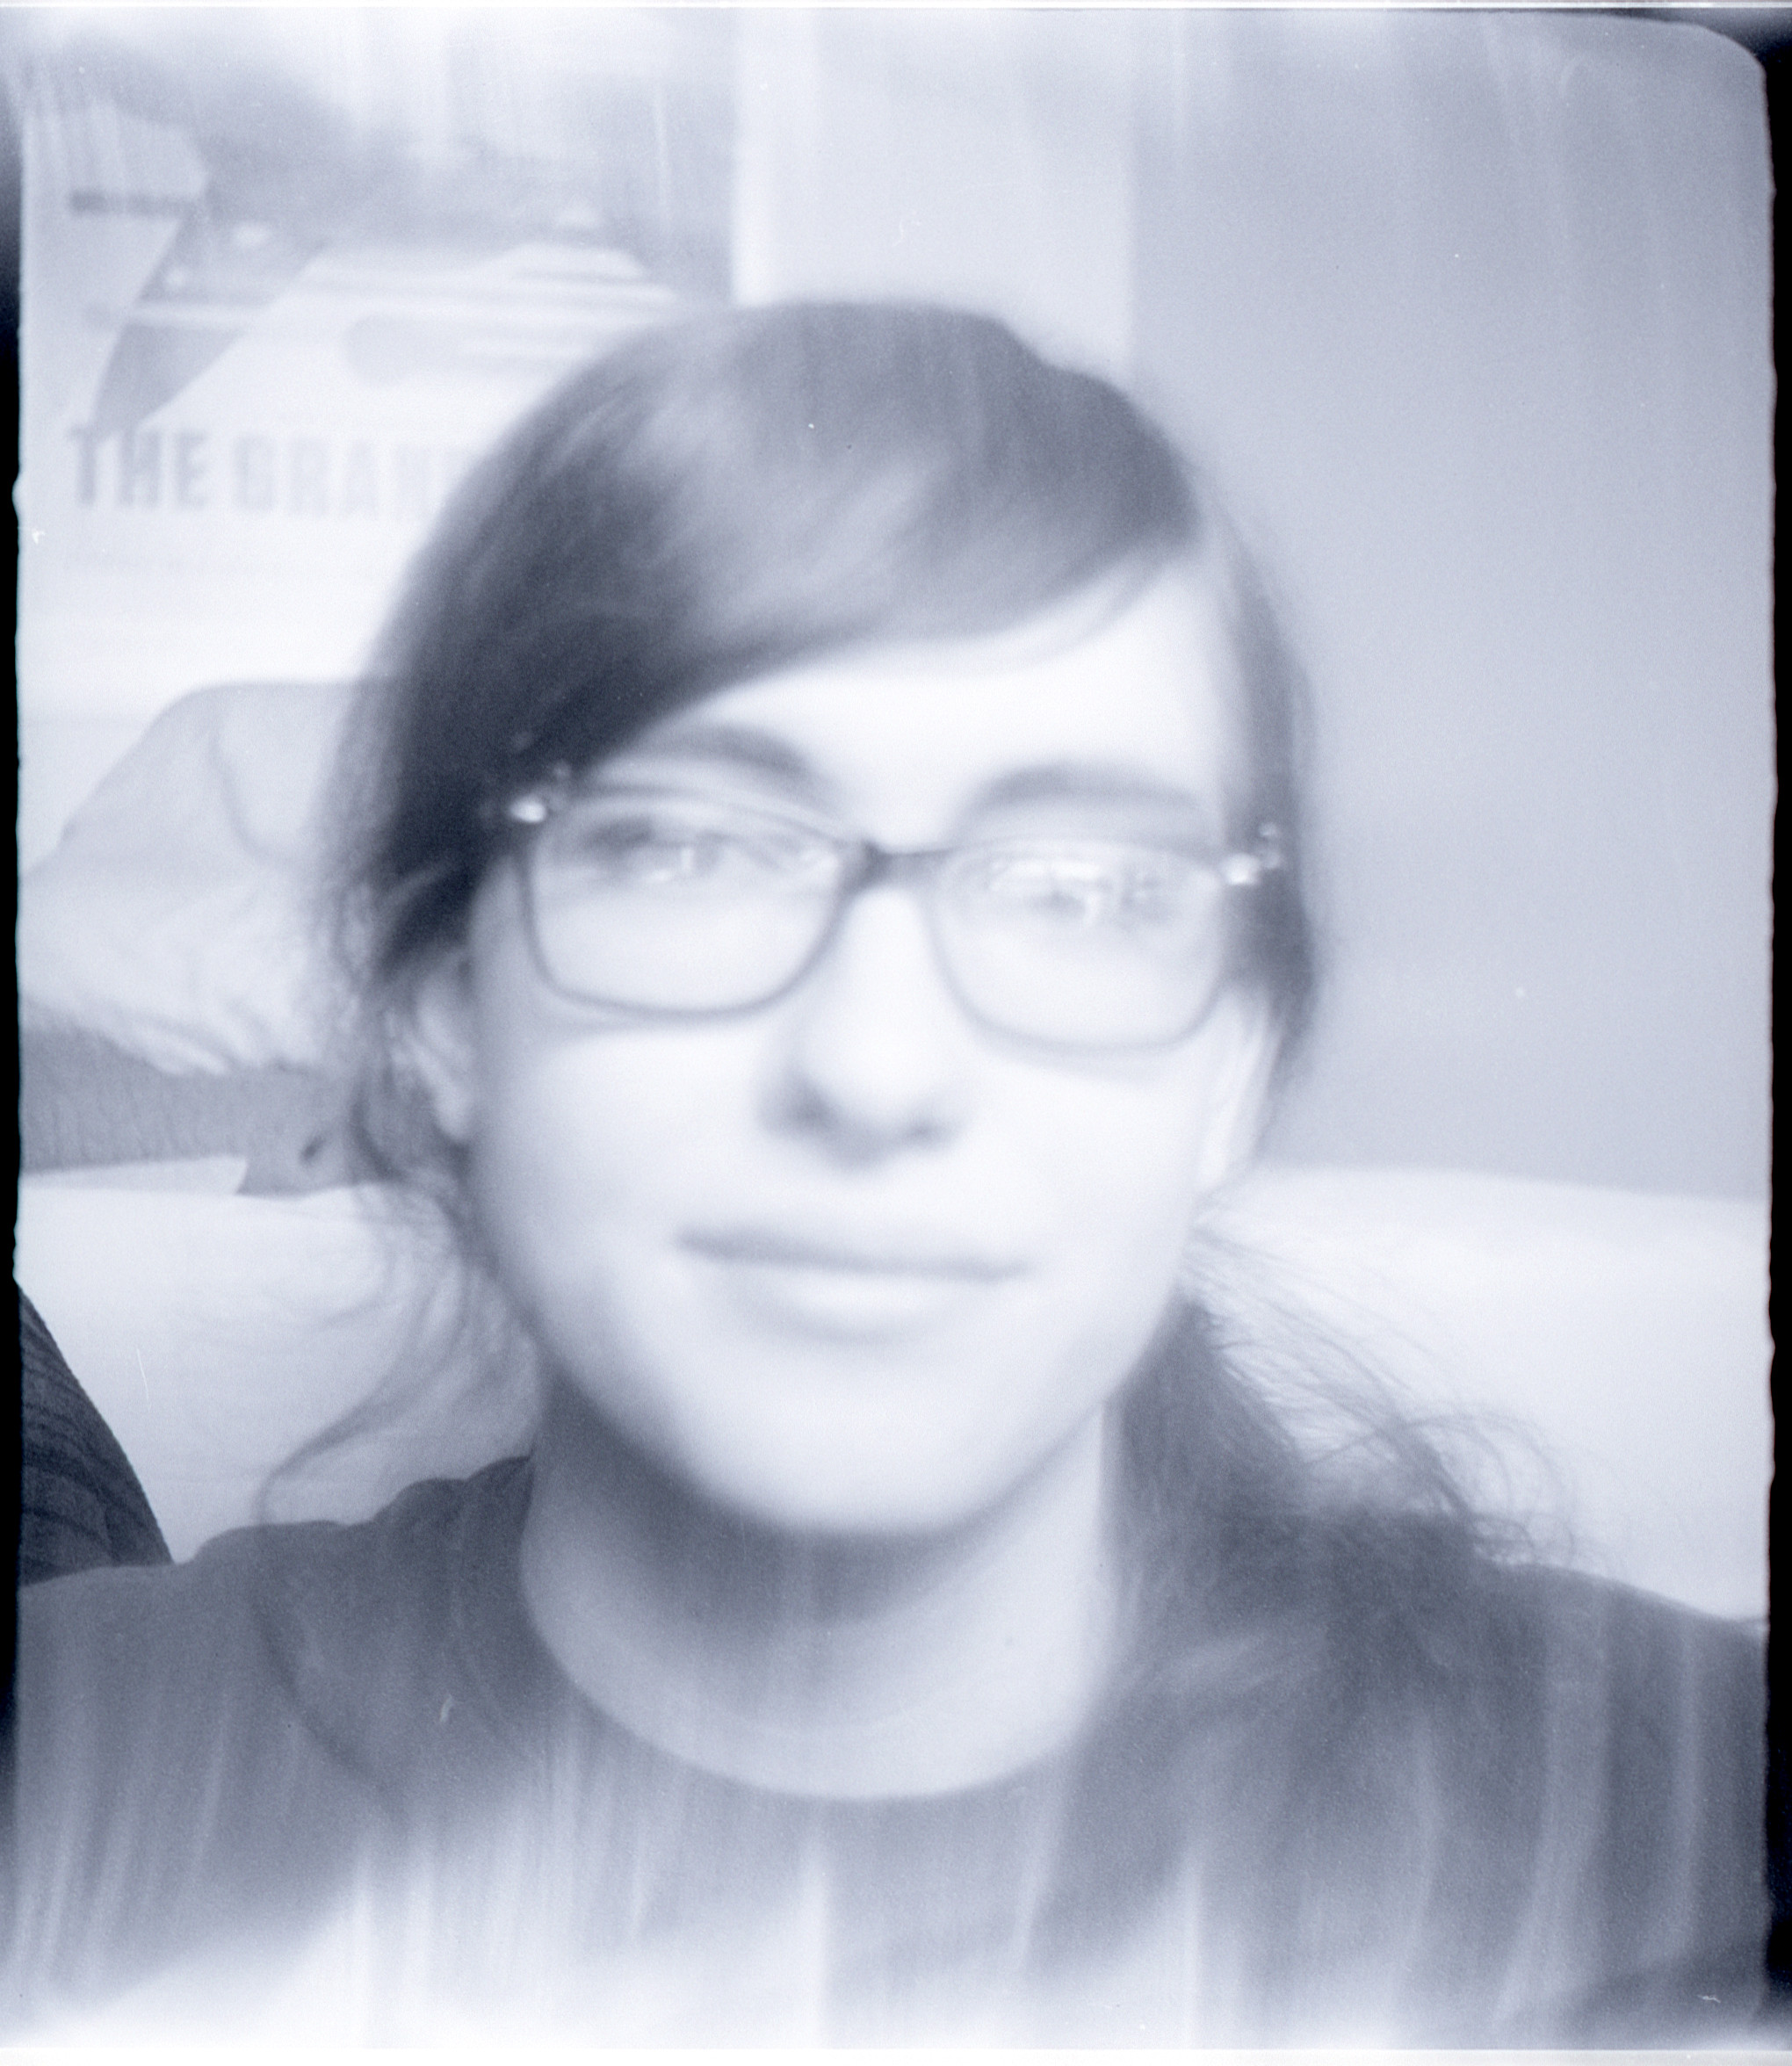 a very washed out black and white picture of a blurry girl looking at the camera. light from the window in front of her is reflected in her glasses